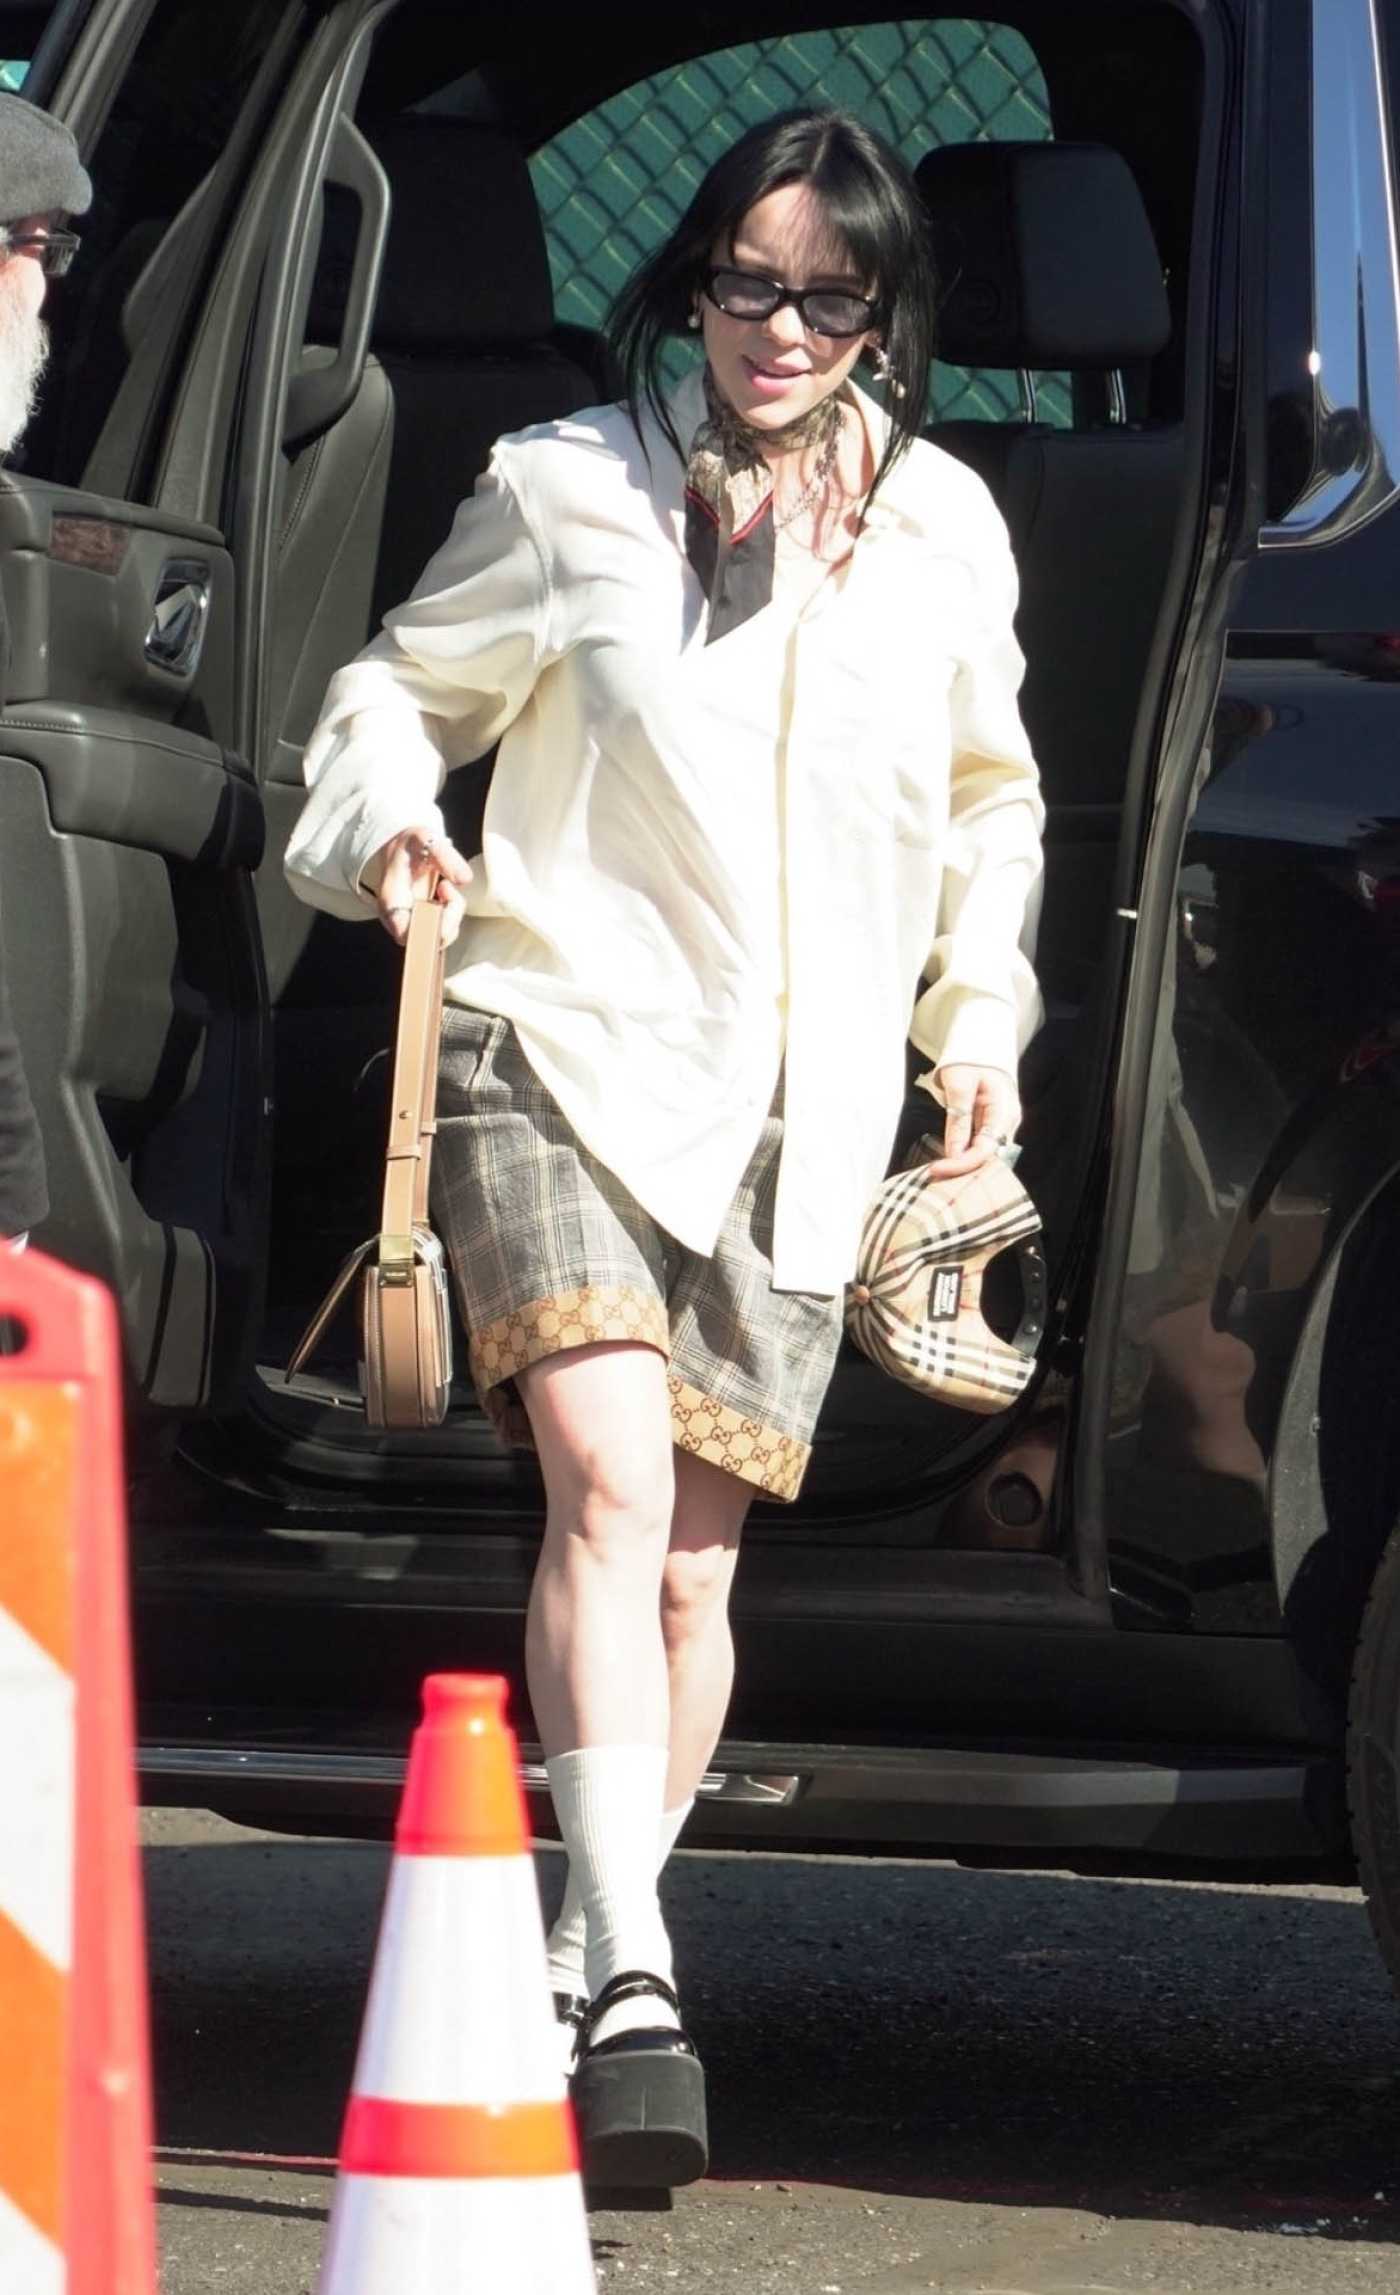 BIllie Eilish in a White Shirt Arrives at Super Bowl LVII at the State Farm Stadium in Glendale 02/12/2023